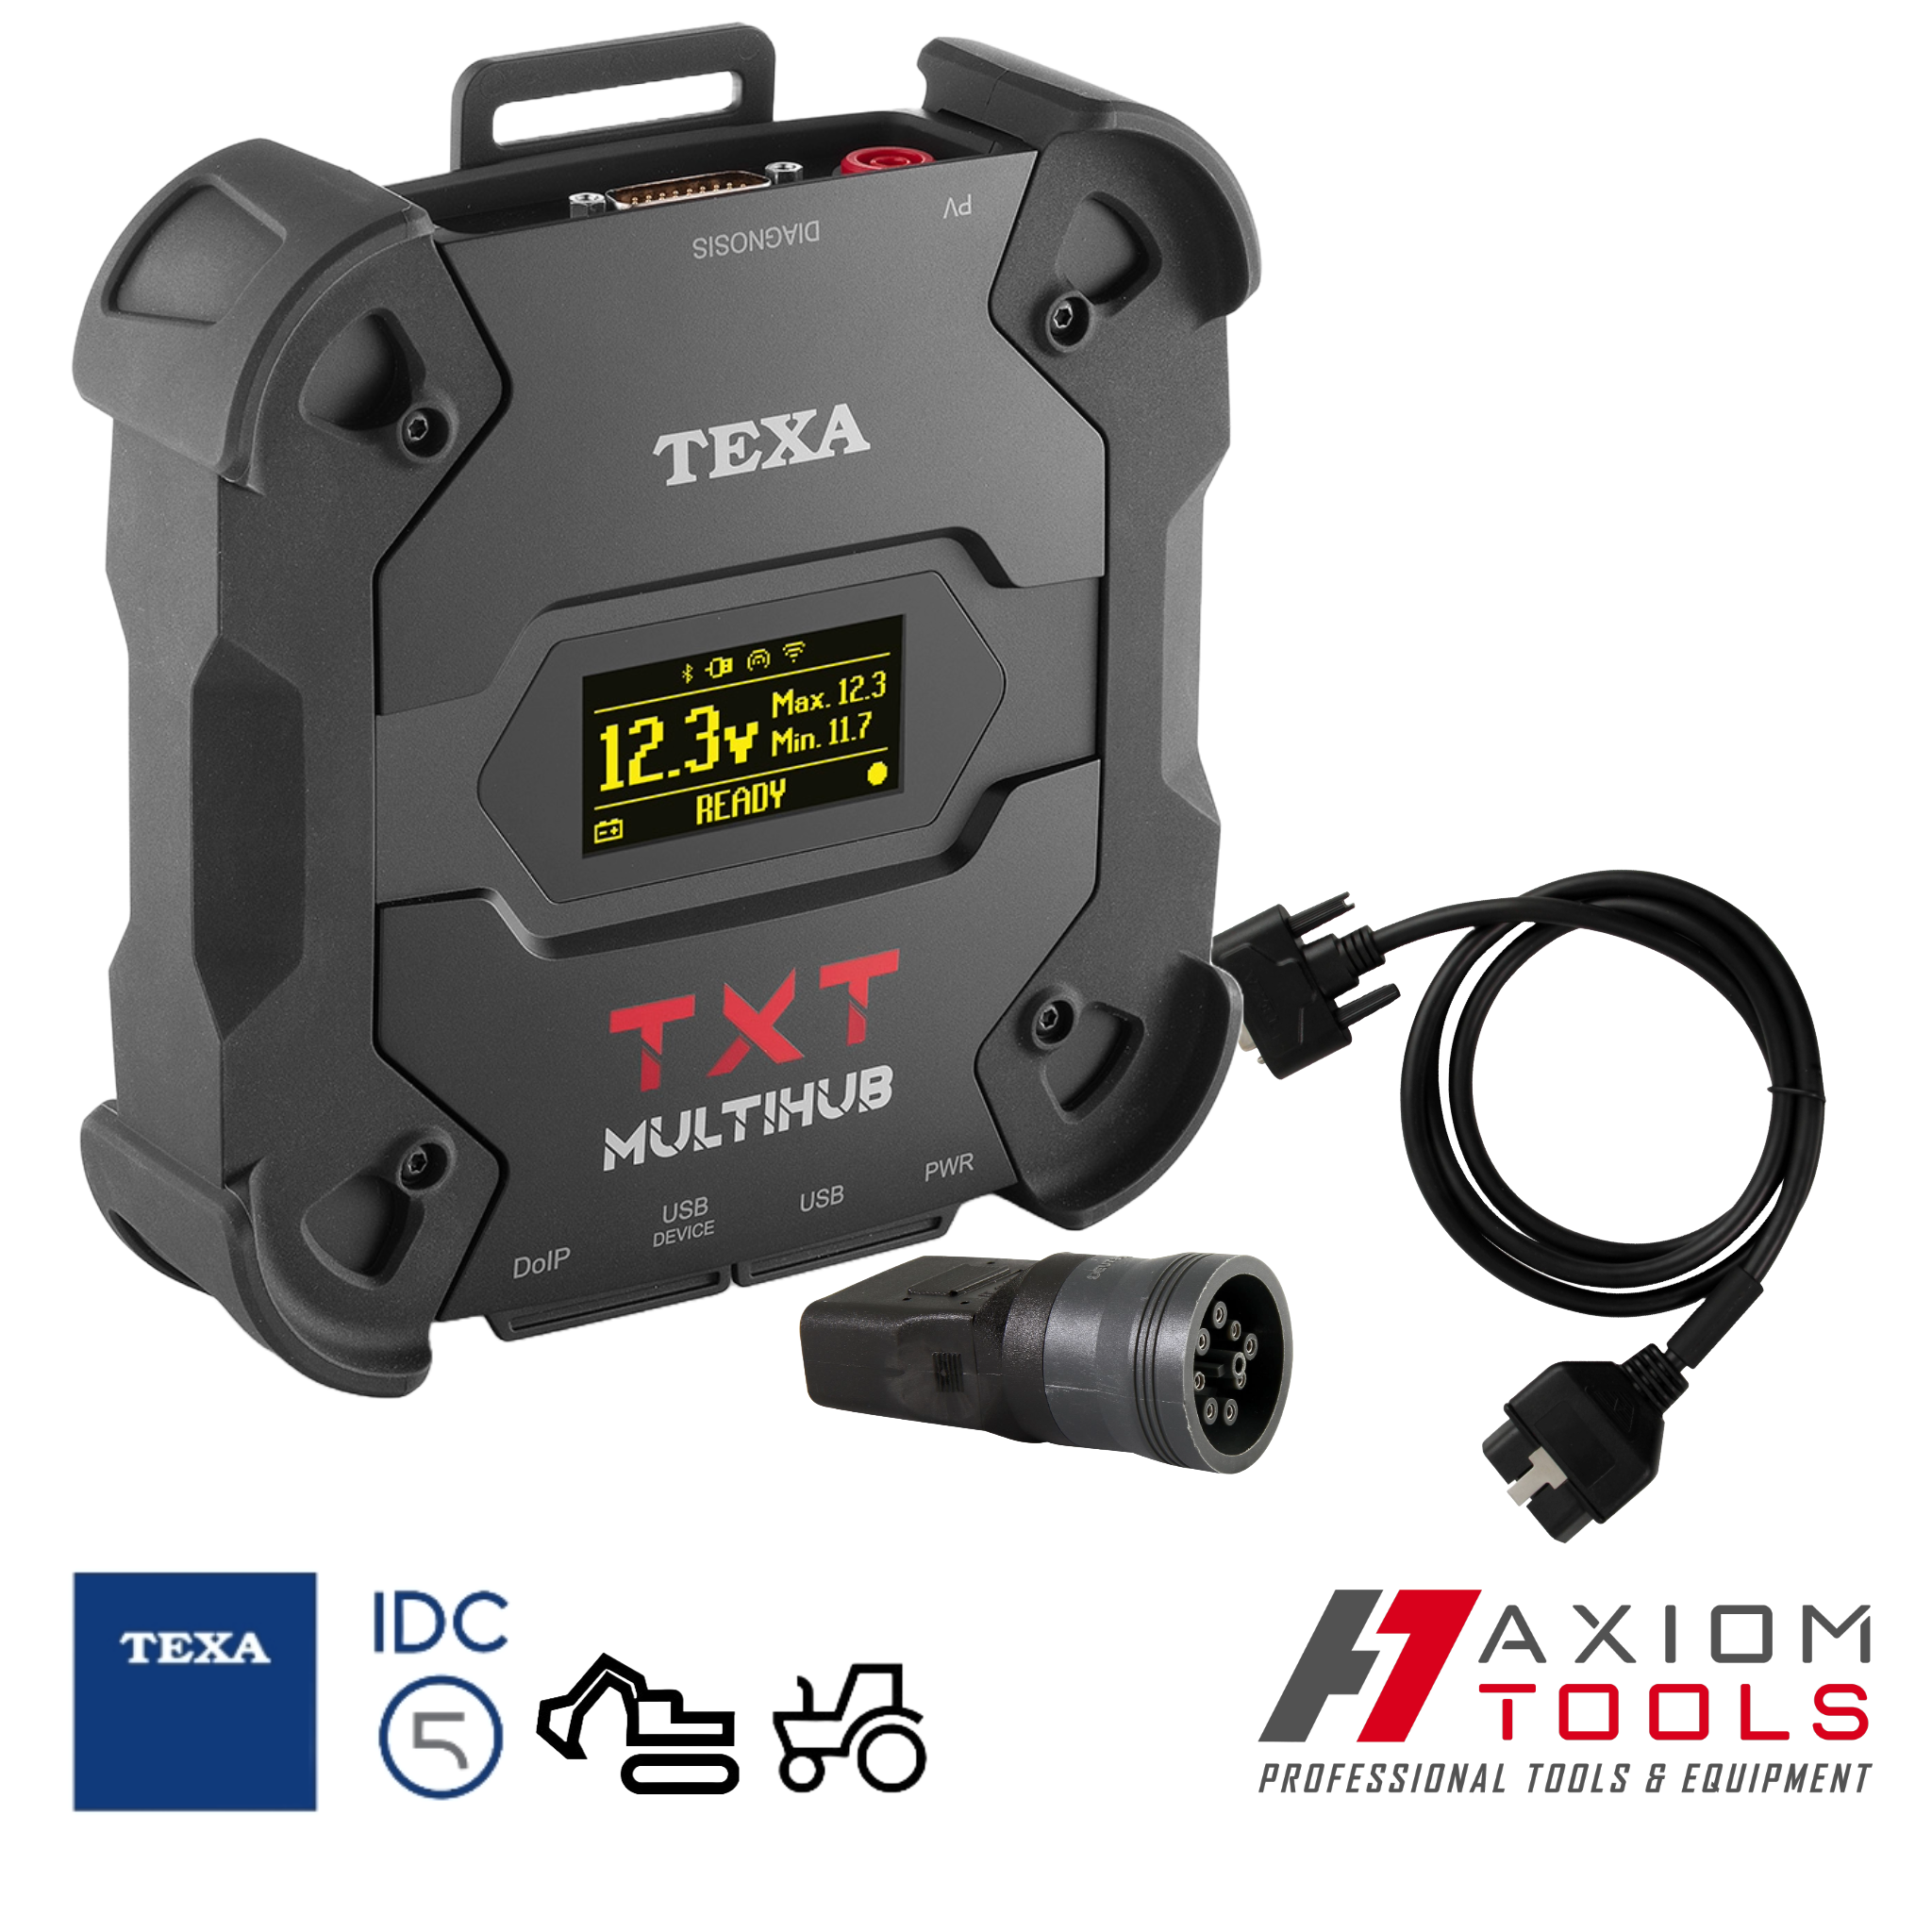 TEXA OFF HIGHWAY ENTRY LEVEL DIAGNOSTIC PACKAGE